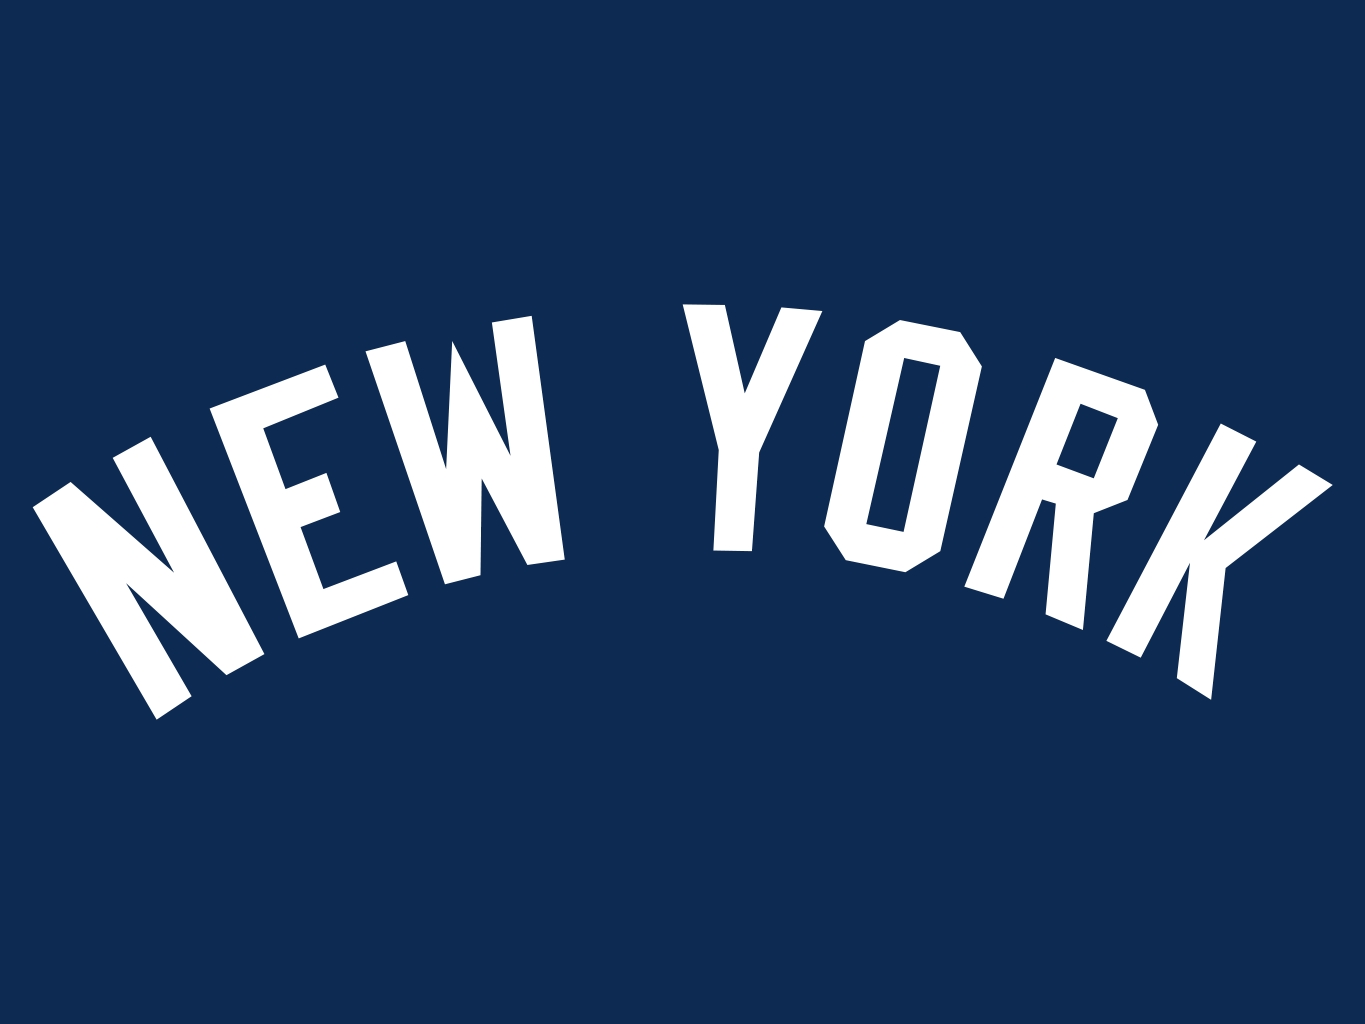 New York Yankees wallpapers New York Yankees background   Page 5